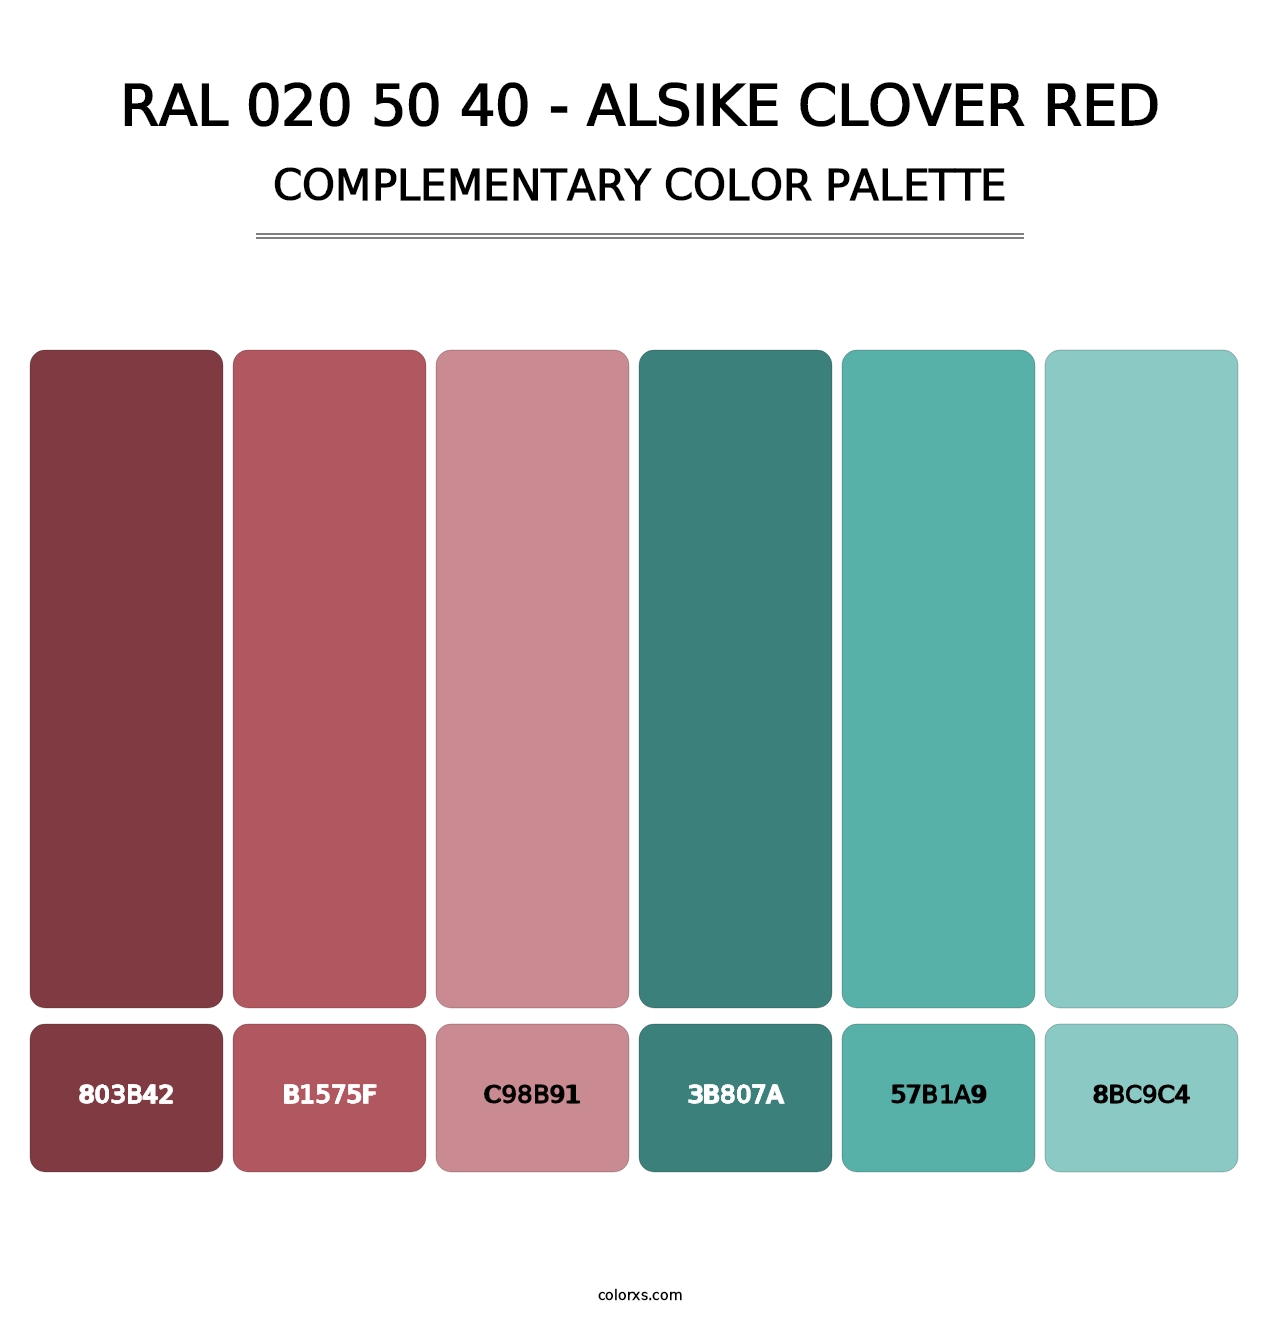 RAL 020 50 40 - Alsike Clover Red - Complementary Color Palette